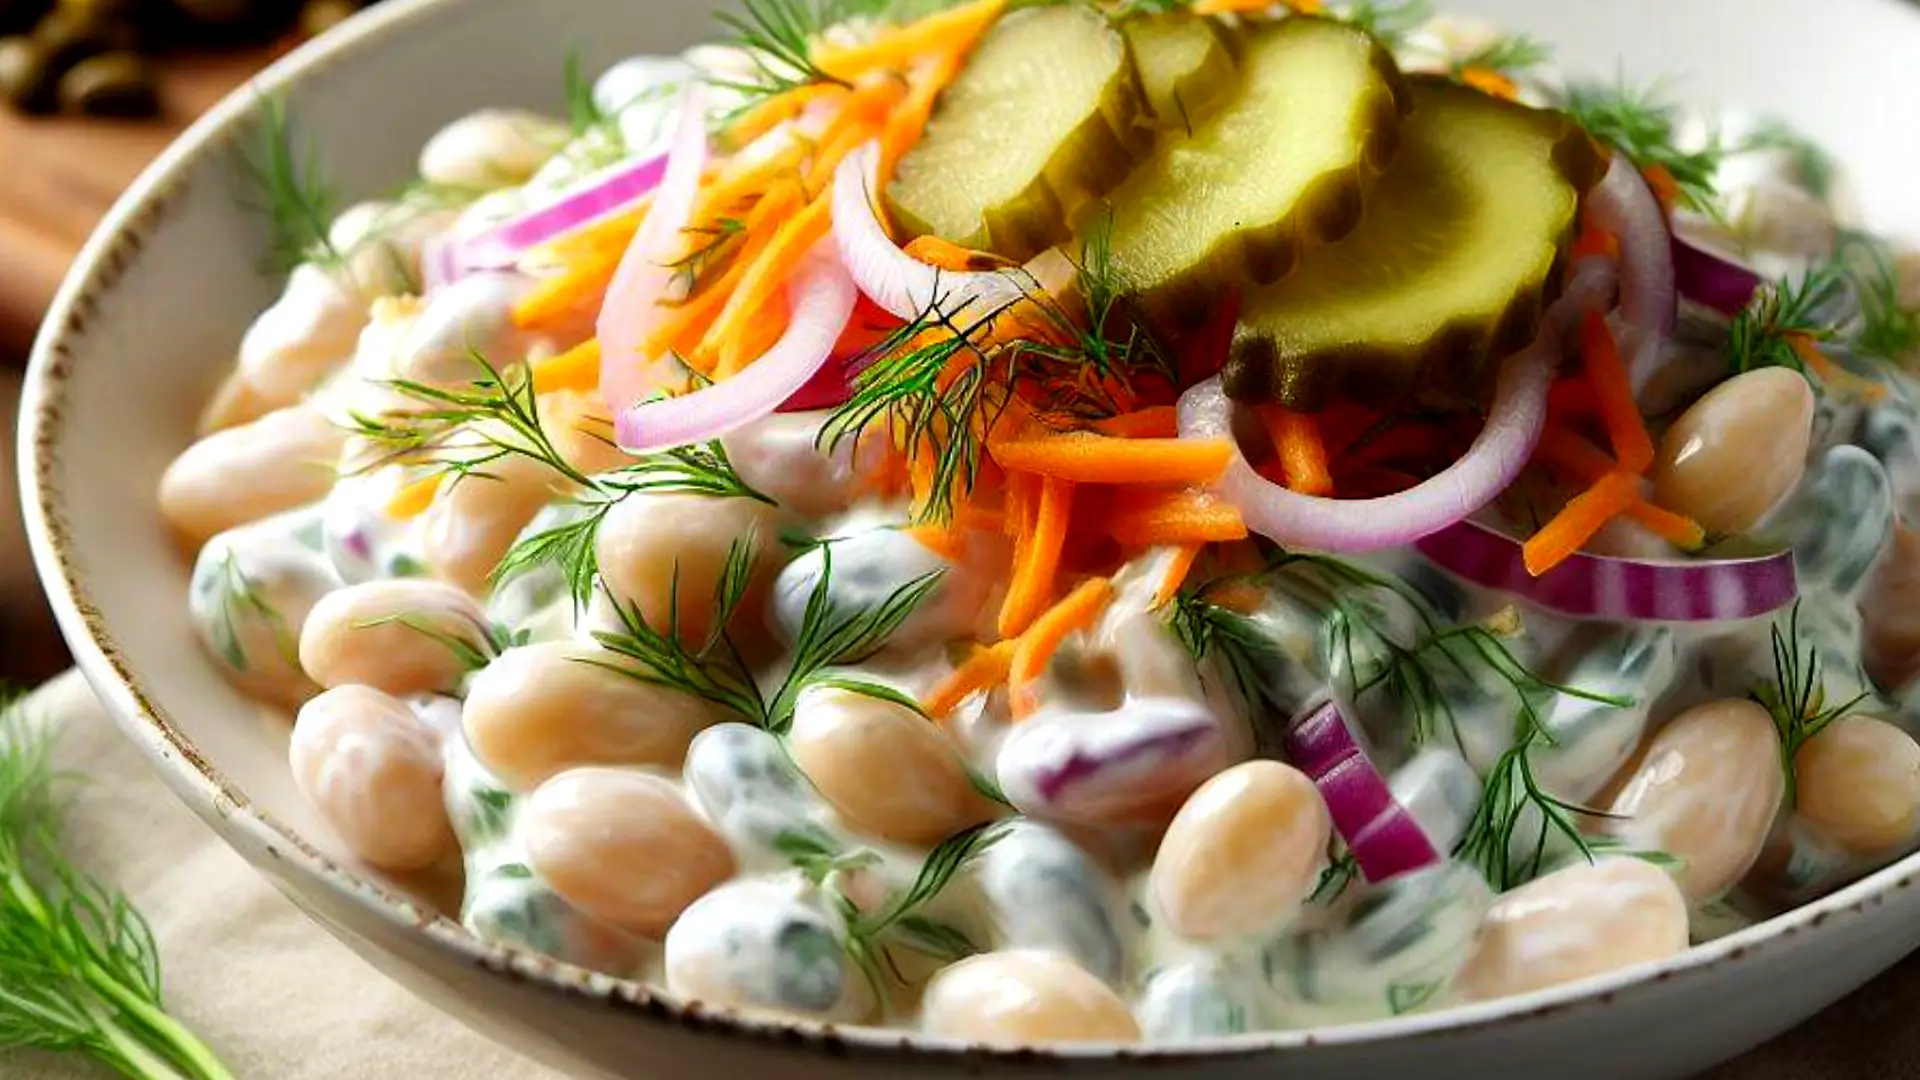 White Bean Salad Recipe with Mayonnaise, Red Onions, Carrots, and Pickles